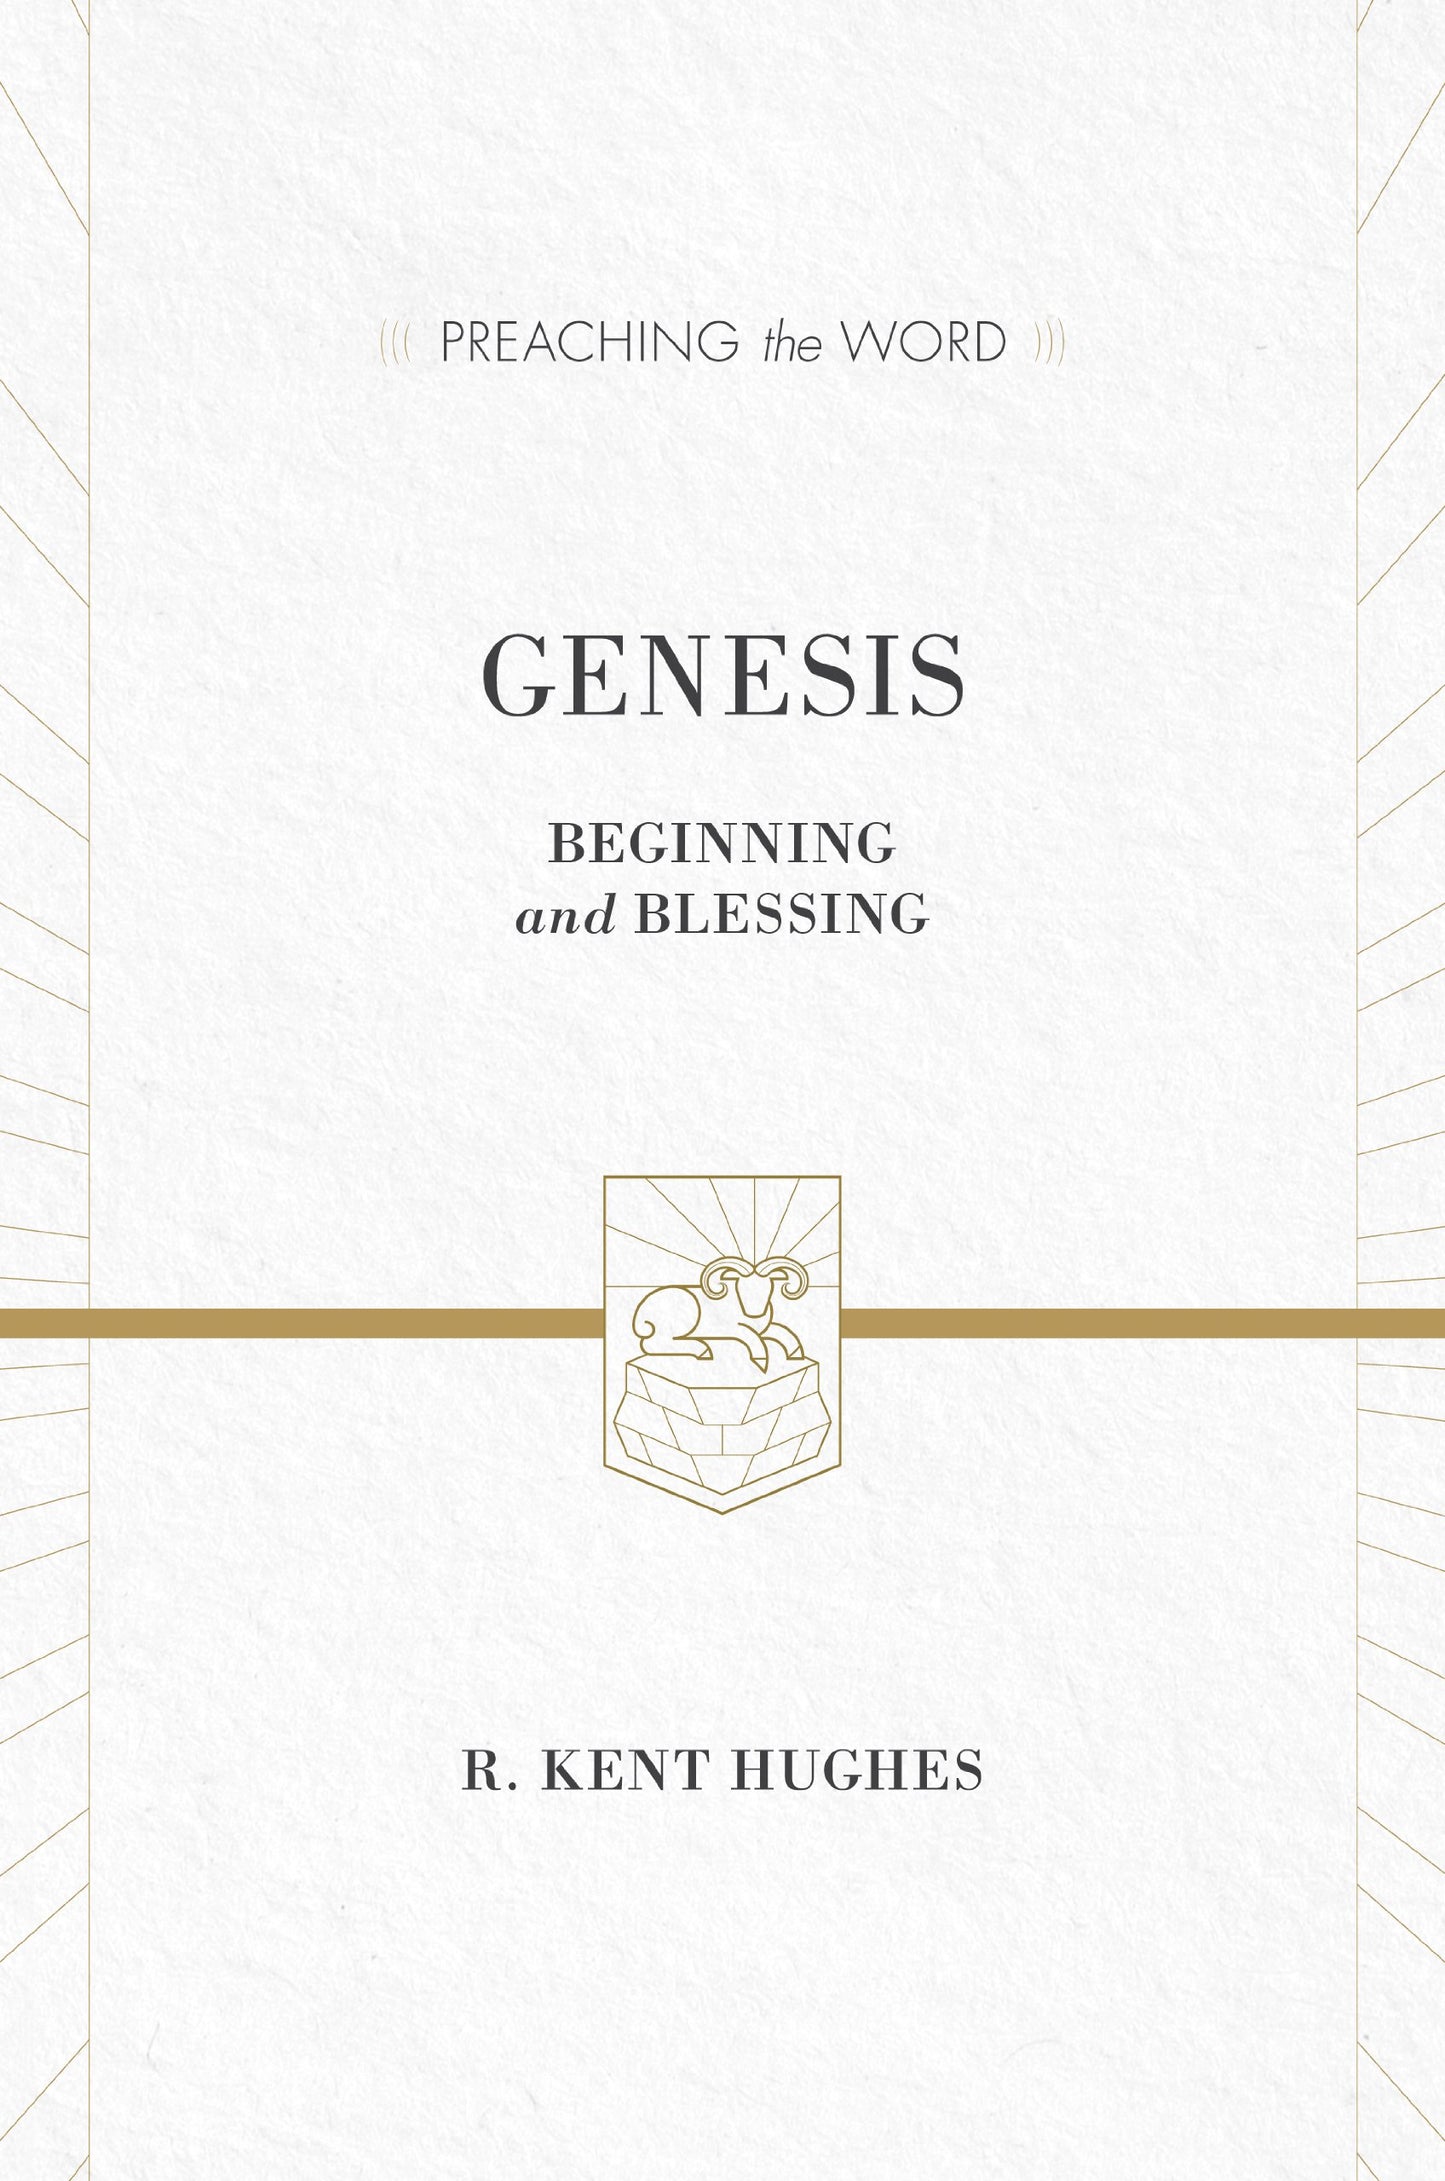 Genesis: Beginning and Blessing (Preaching the Word) Commentary